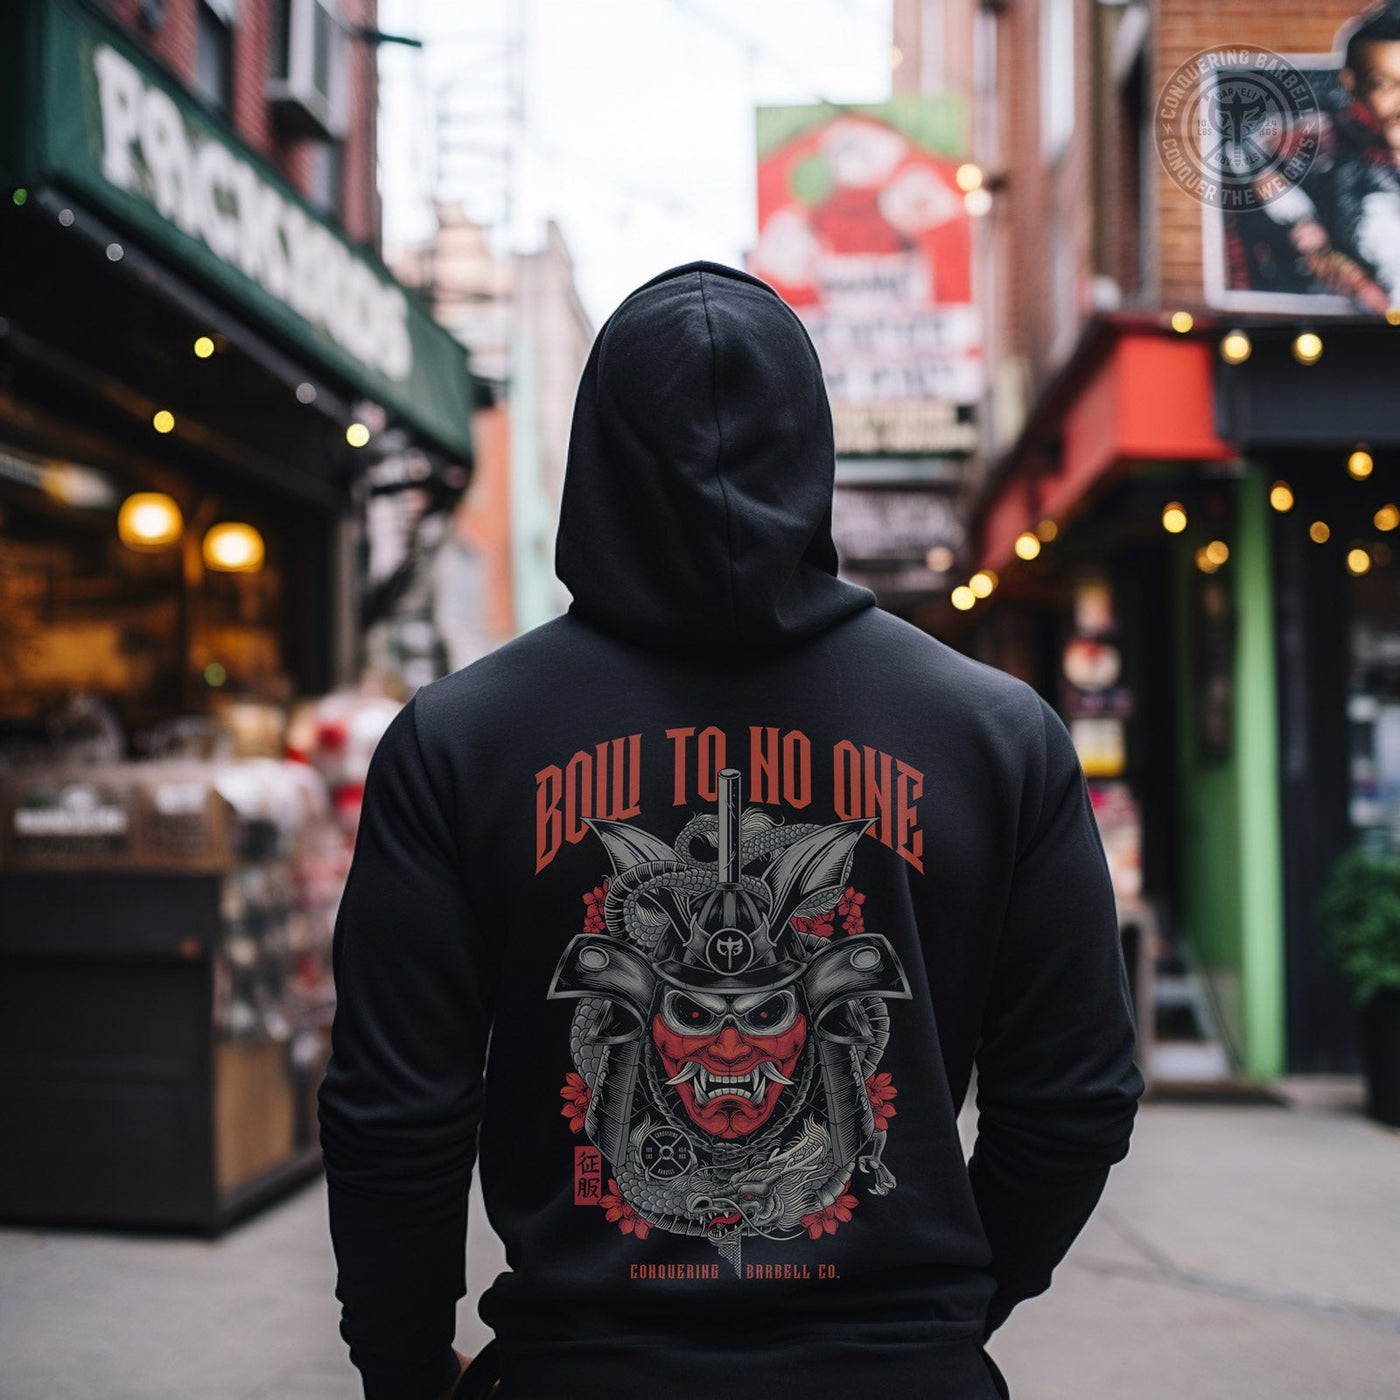 Bow to No One - on Black Pullover Hoodie - Conquering Barbell